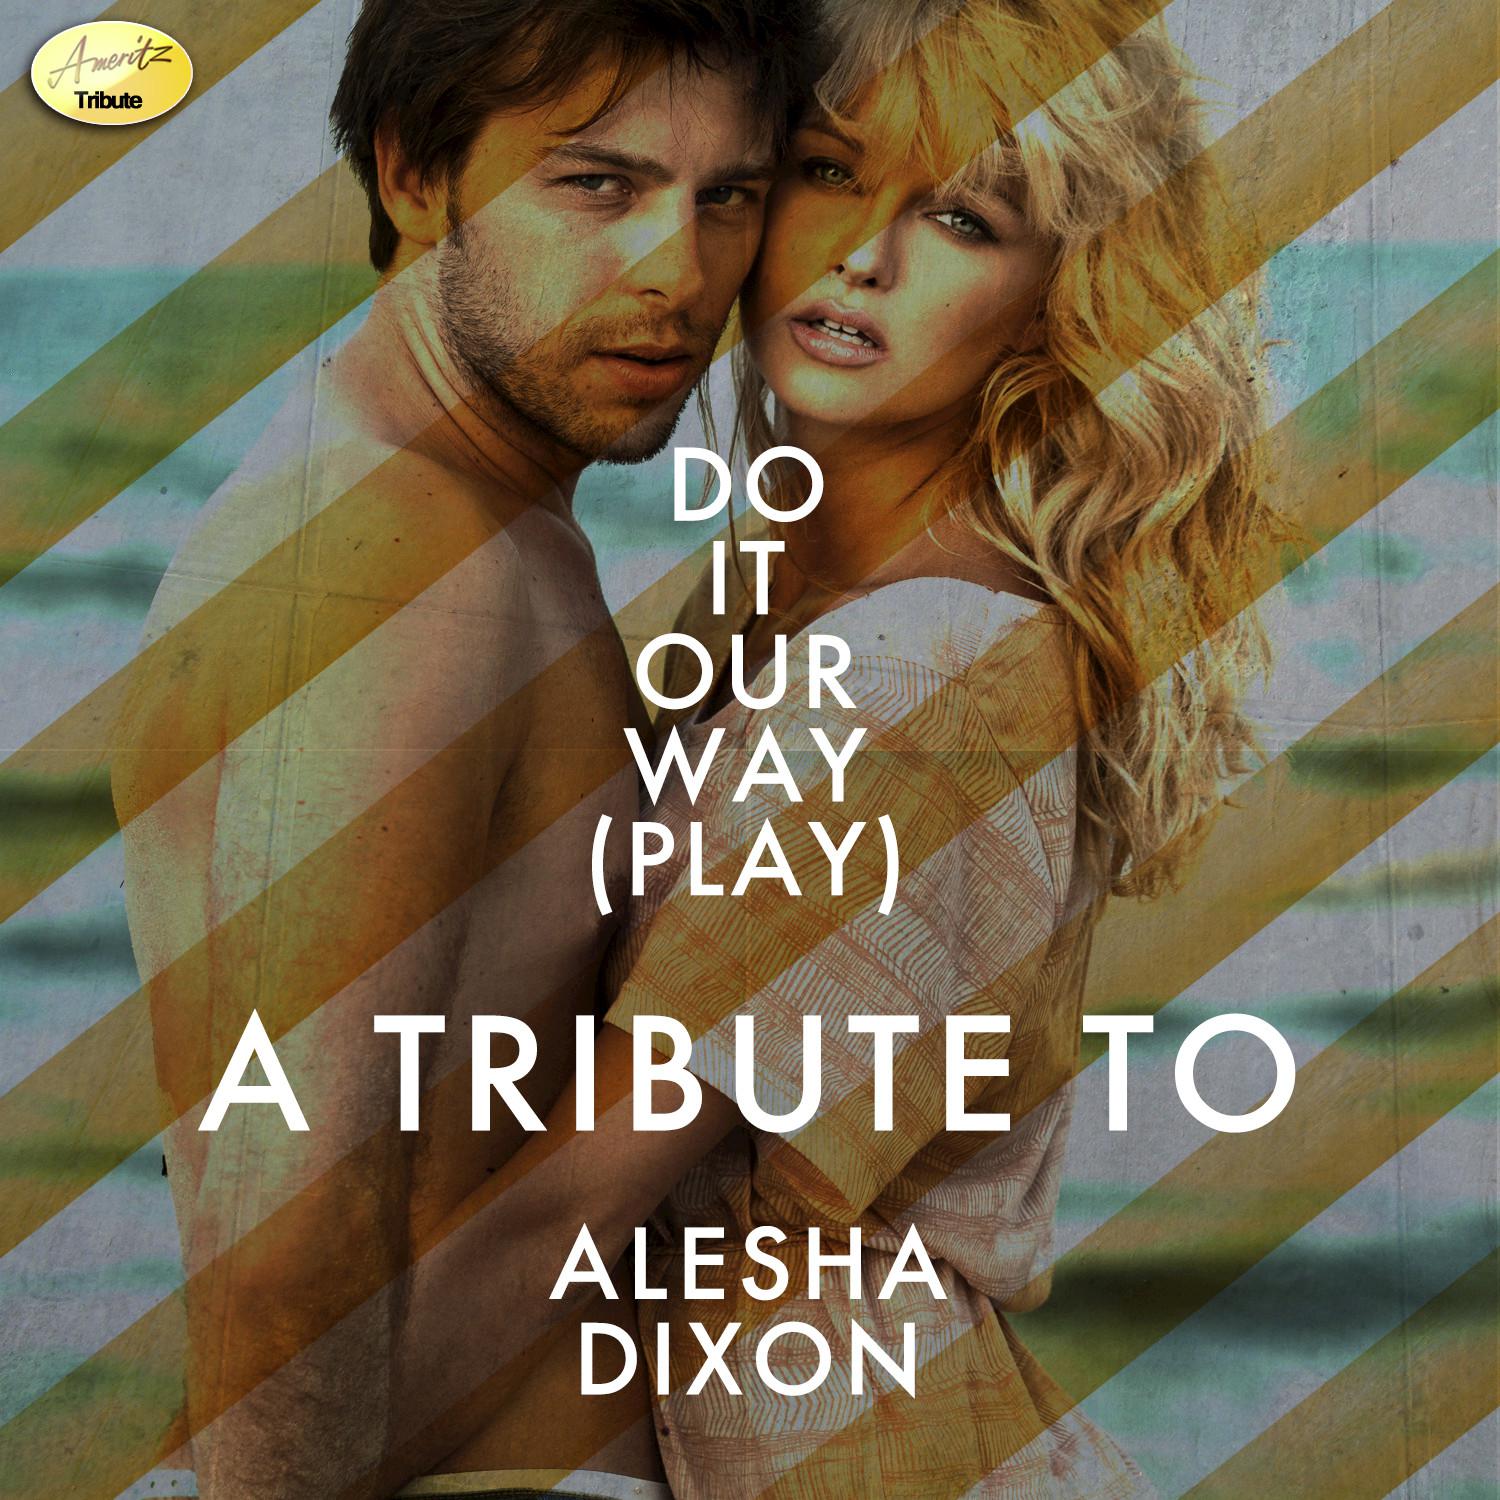 Do It Our Way (Play) - A Tribute to Alesha Dixon